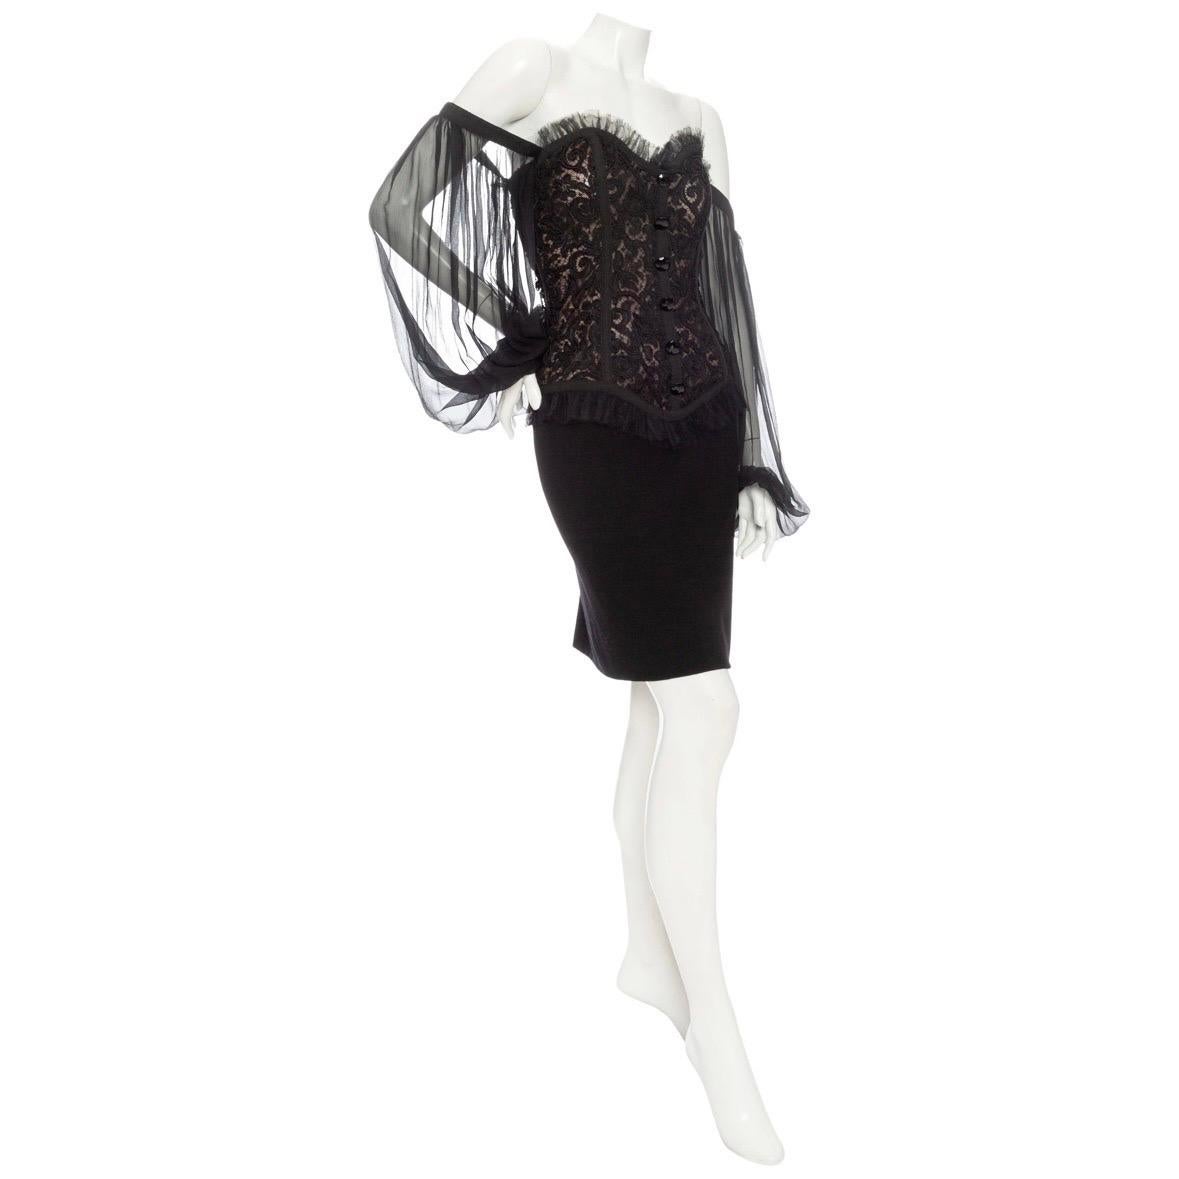 Yves Saint Laurent 1980s Black Off-the-Shoulder Lace Bustier Dress

Circa 1980s
Rive Gauche line
Black/Brown
Sweetheart neckline
Off-the-shoulder sheer balloon sleeves
Bustier with lace overlay
Front decorative buttons
Grosgrain and tulle